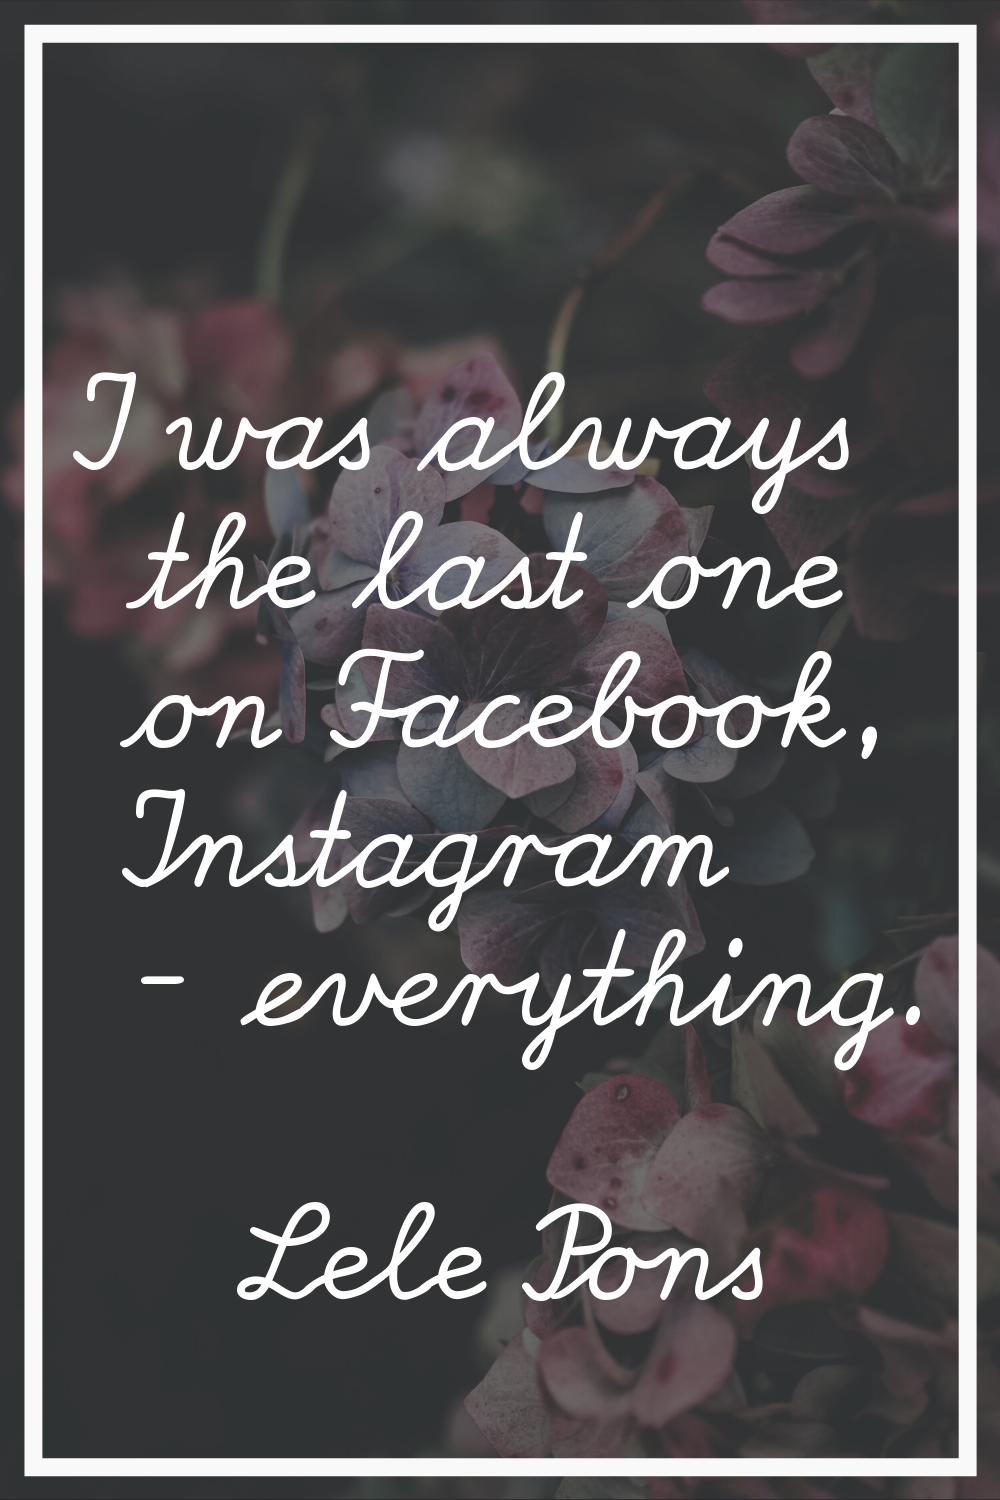 I was always the last one on Facebook, Instagram - everything.